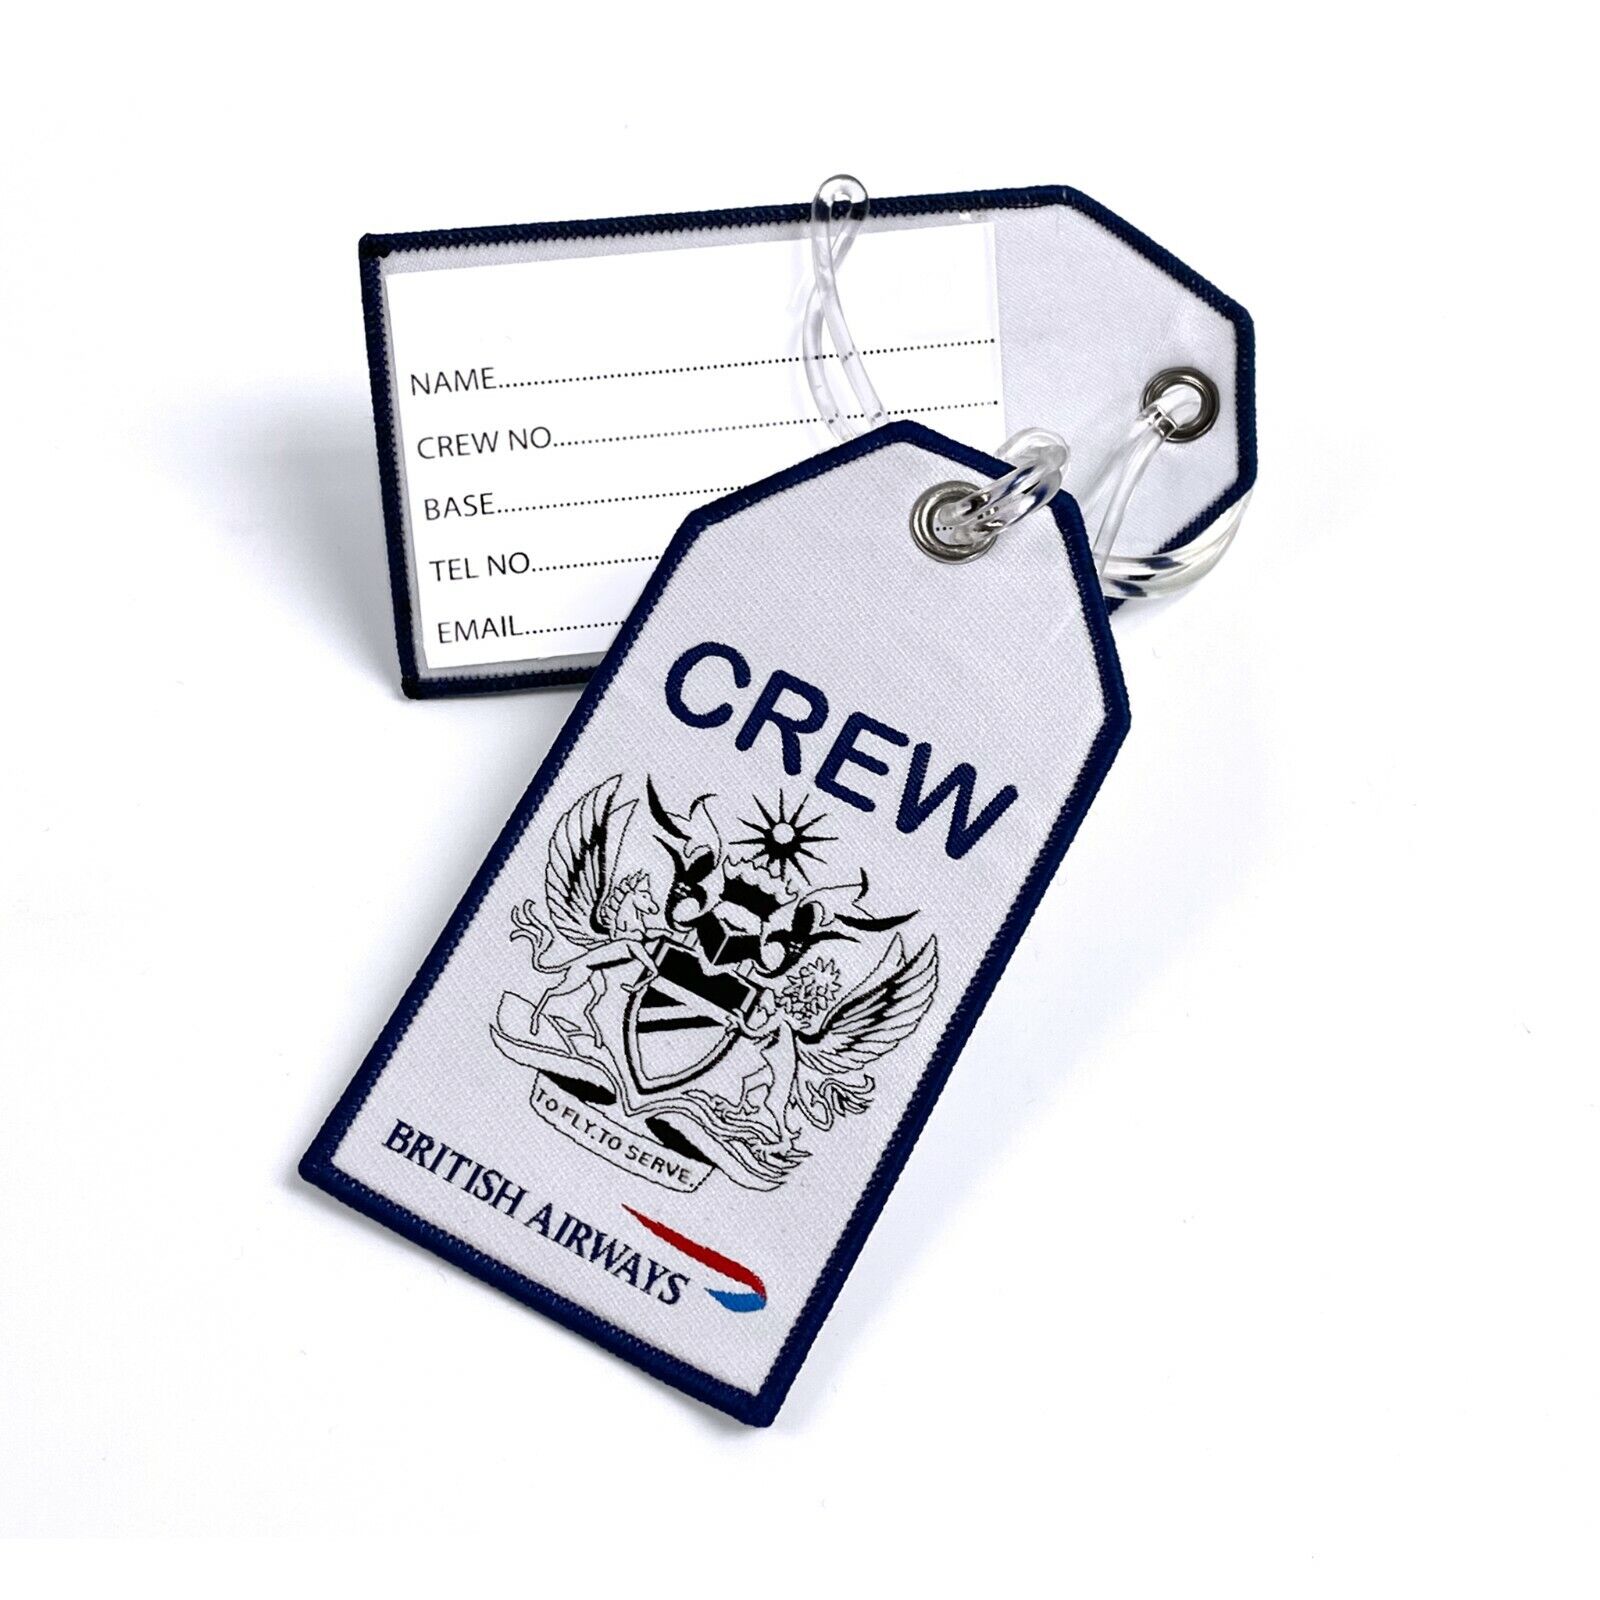 British Airways To Fly To Serve Woven Crew Tag White